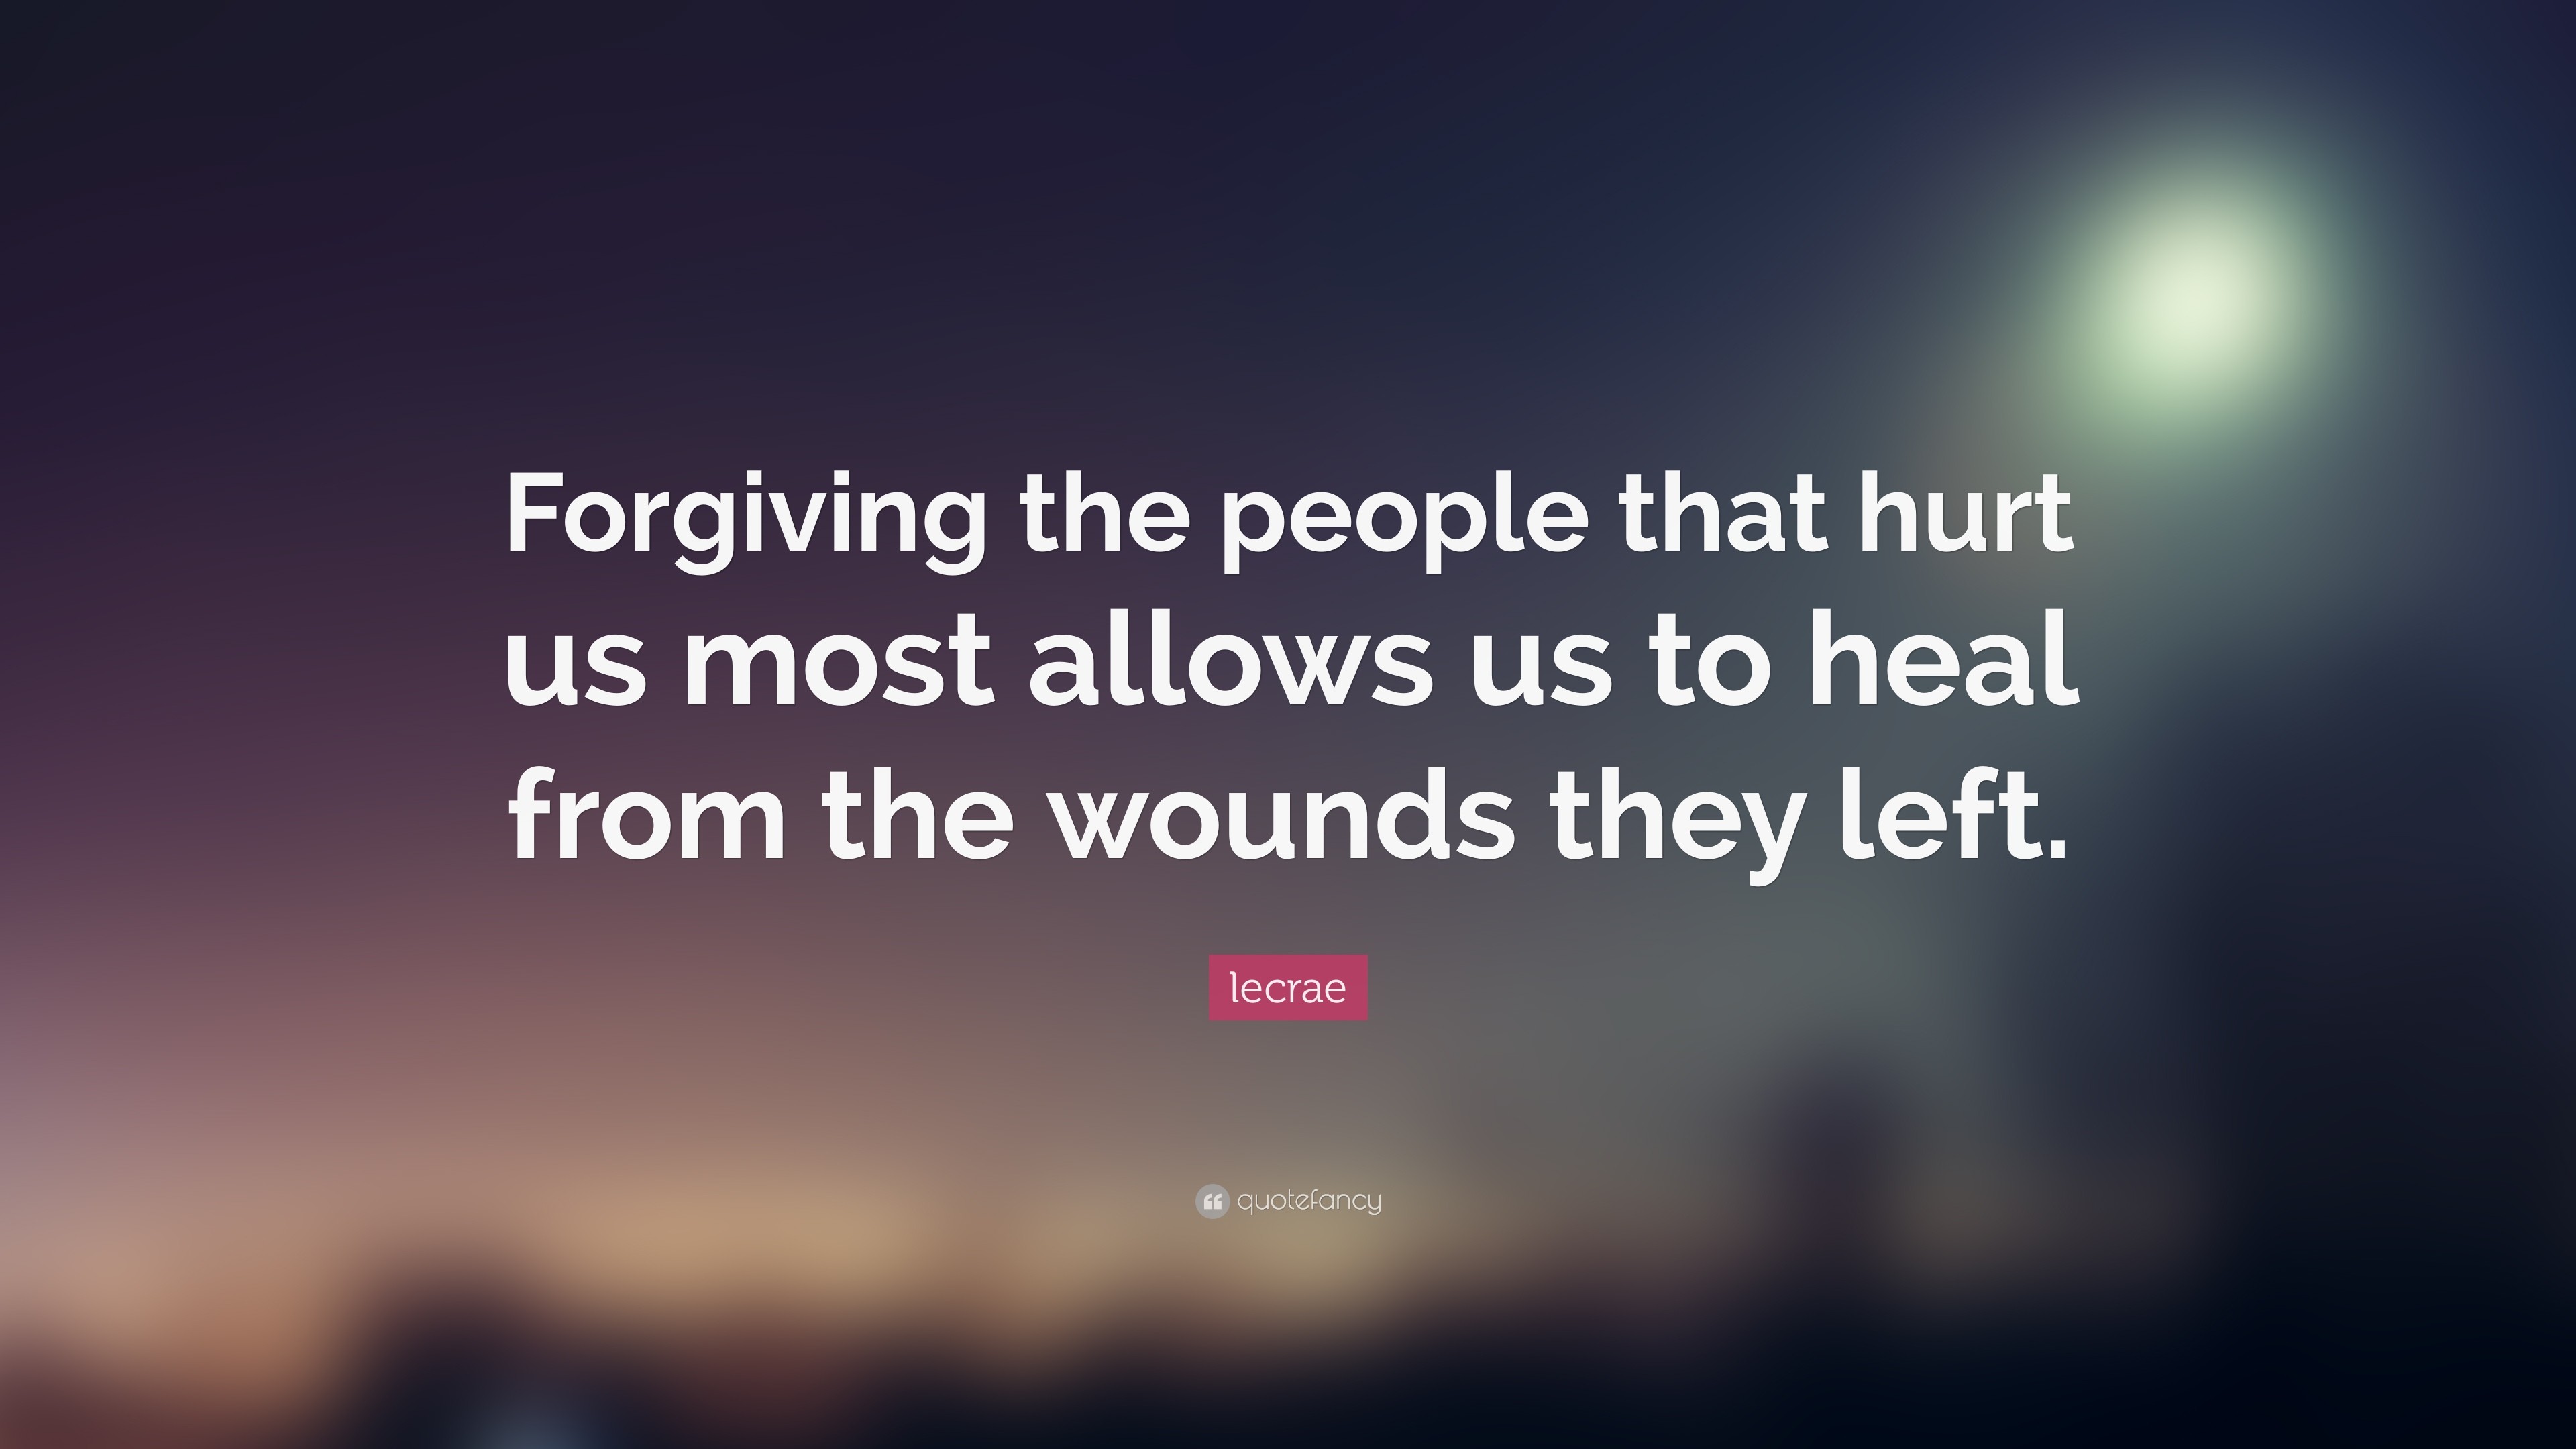 3840x2160 Lecrae Quote: “Forgiving the people that hurt us most allows us to heal from